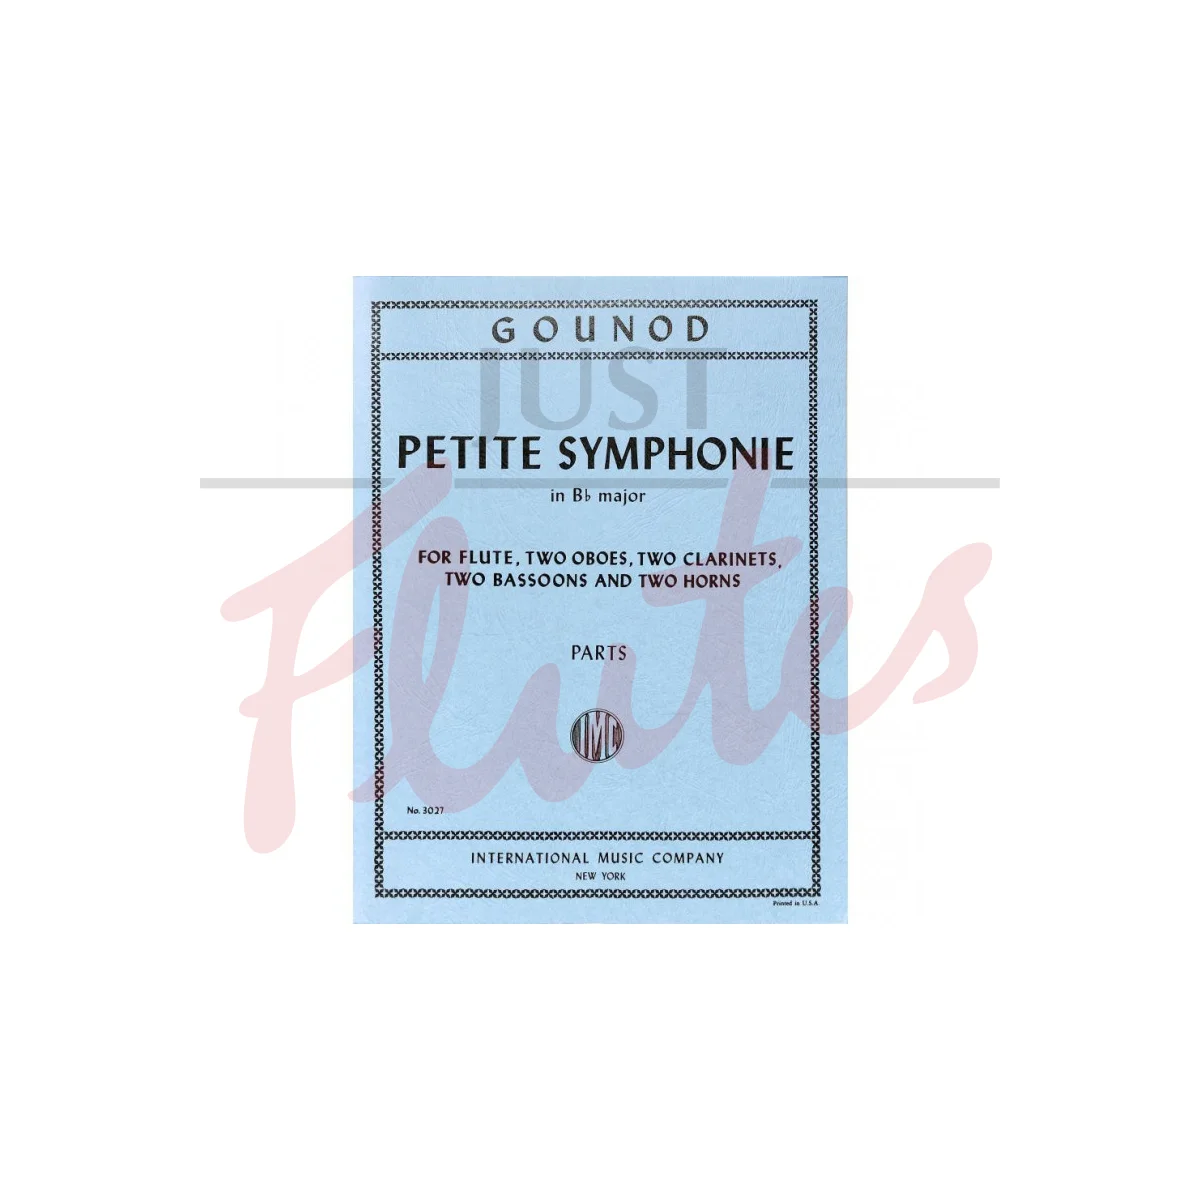 Petite Symphonie in Bb major for Flute, Two Oboes, Two Clarinets, Two Horns and Two Bassoons